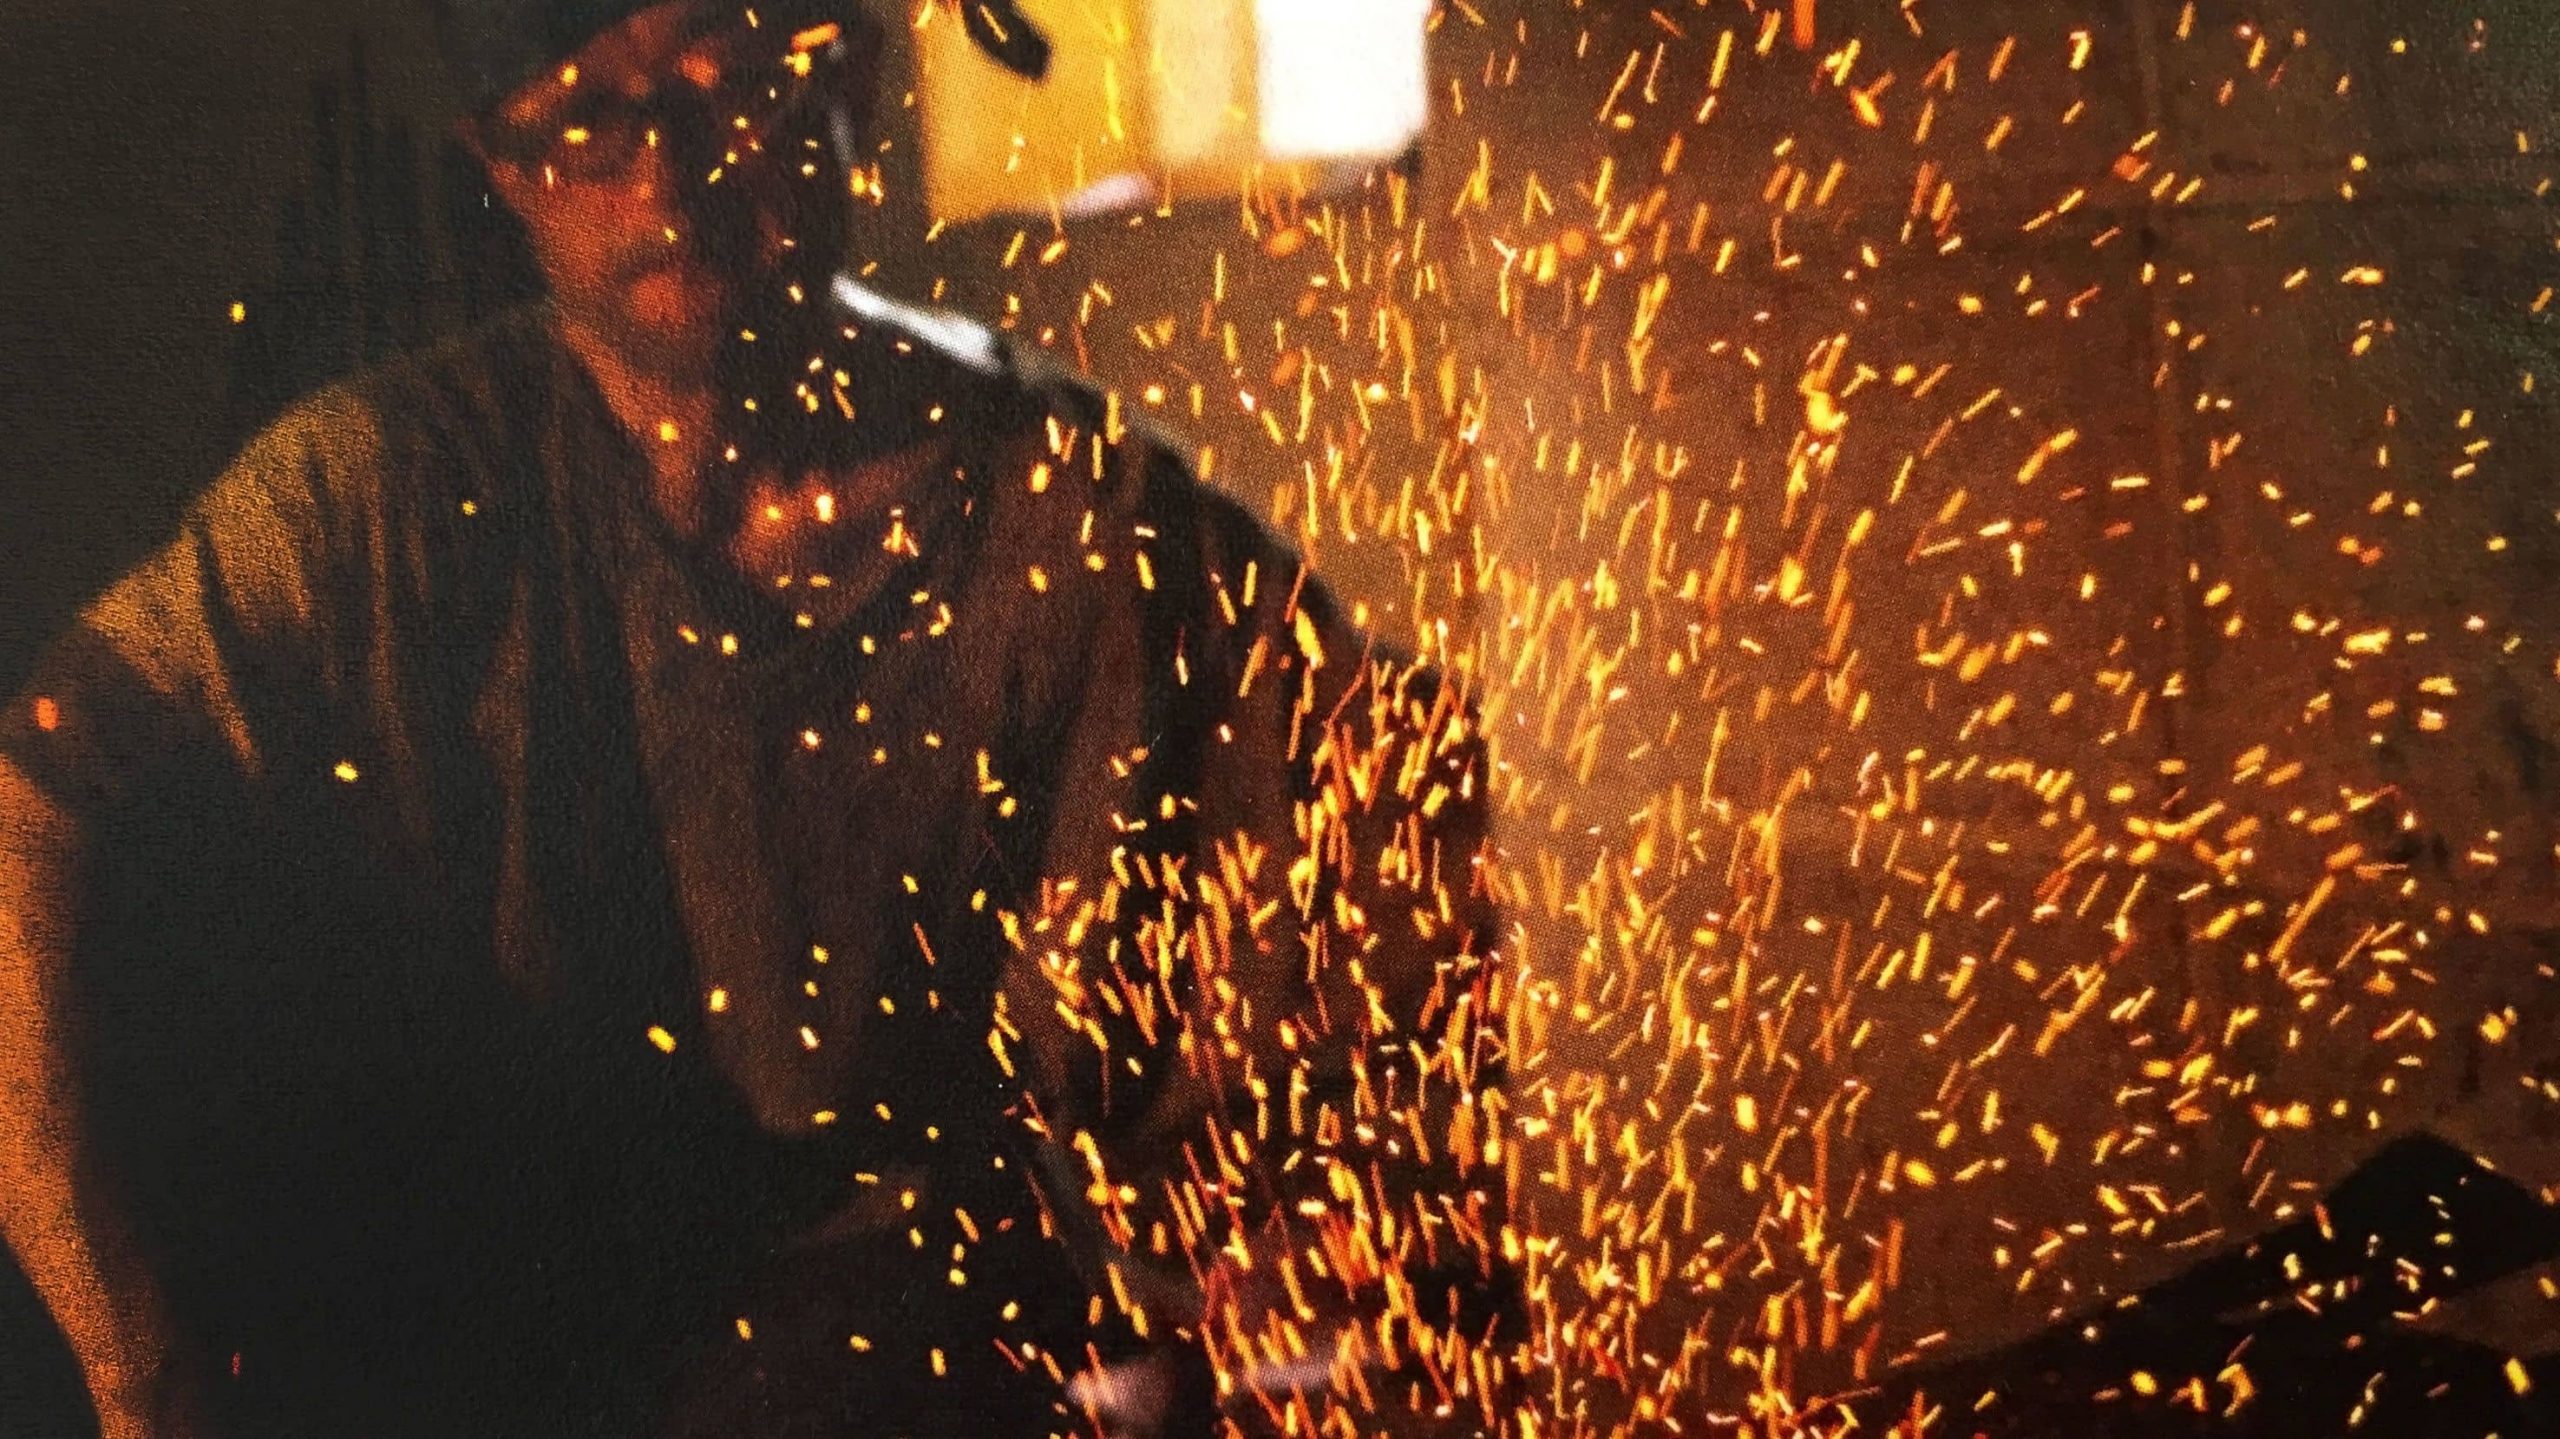 Sparks fly as a man forges a small Japanese katana in Kyoto